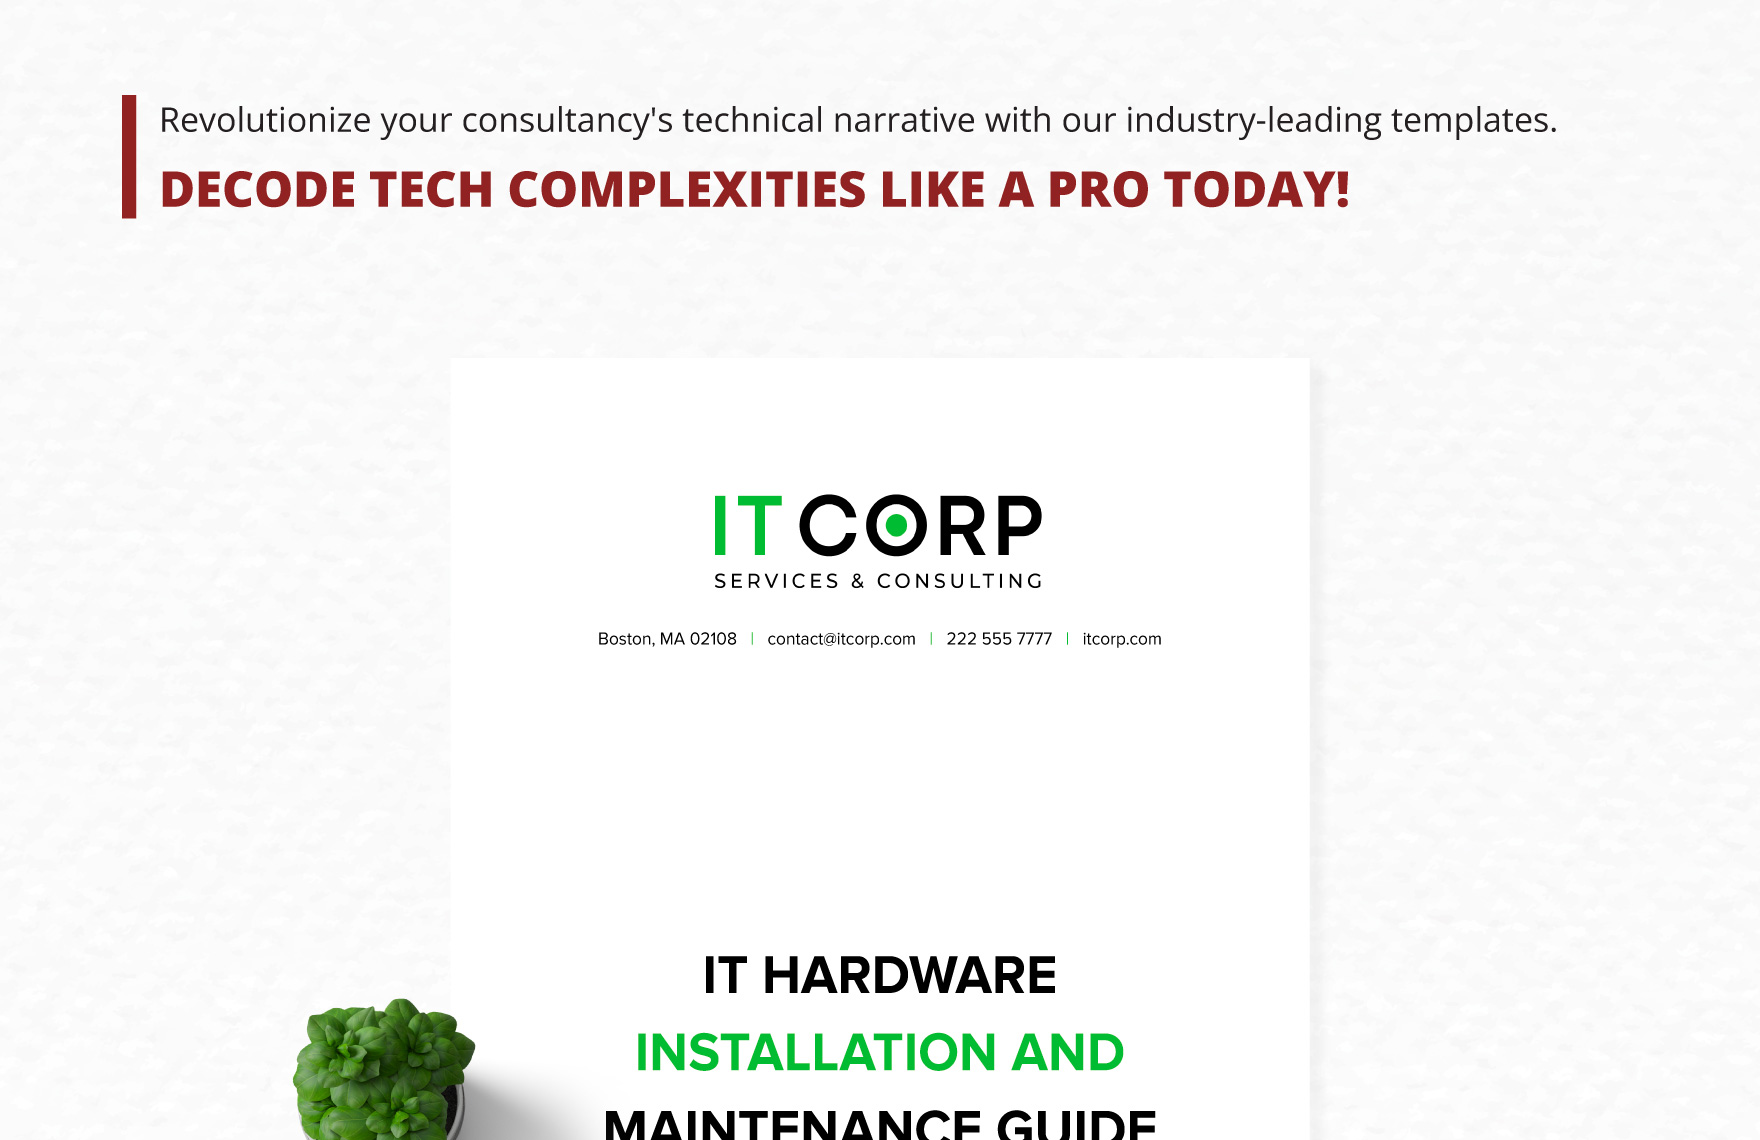 IT Hardware Installation and Maintenance Guide Template